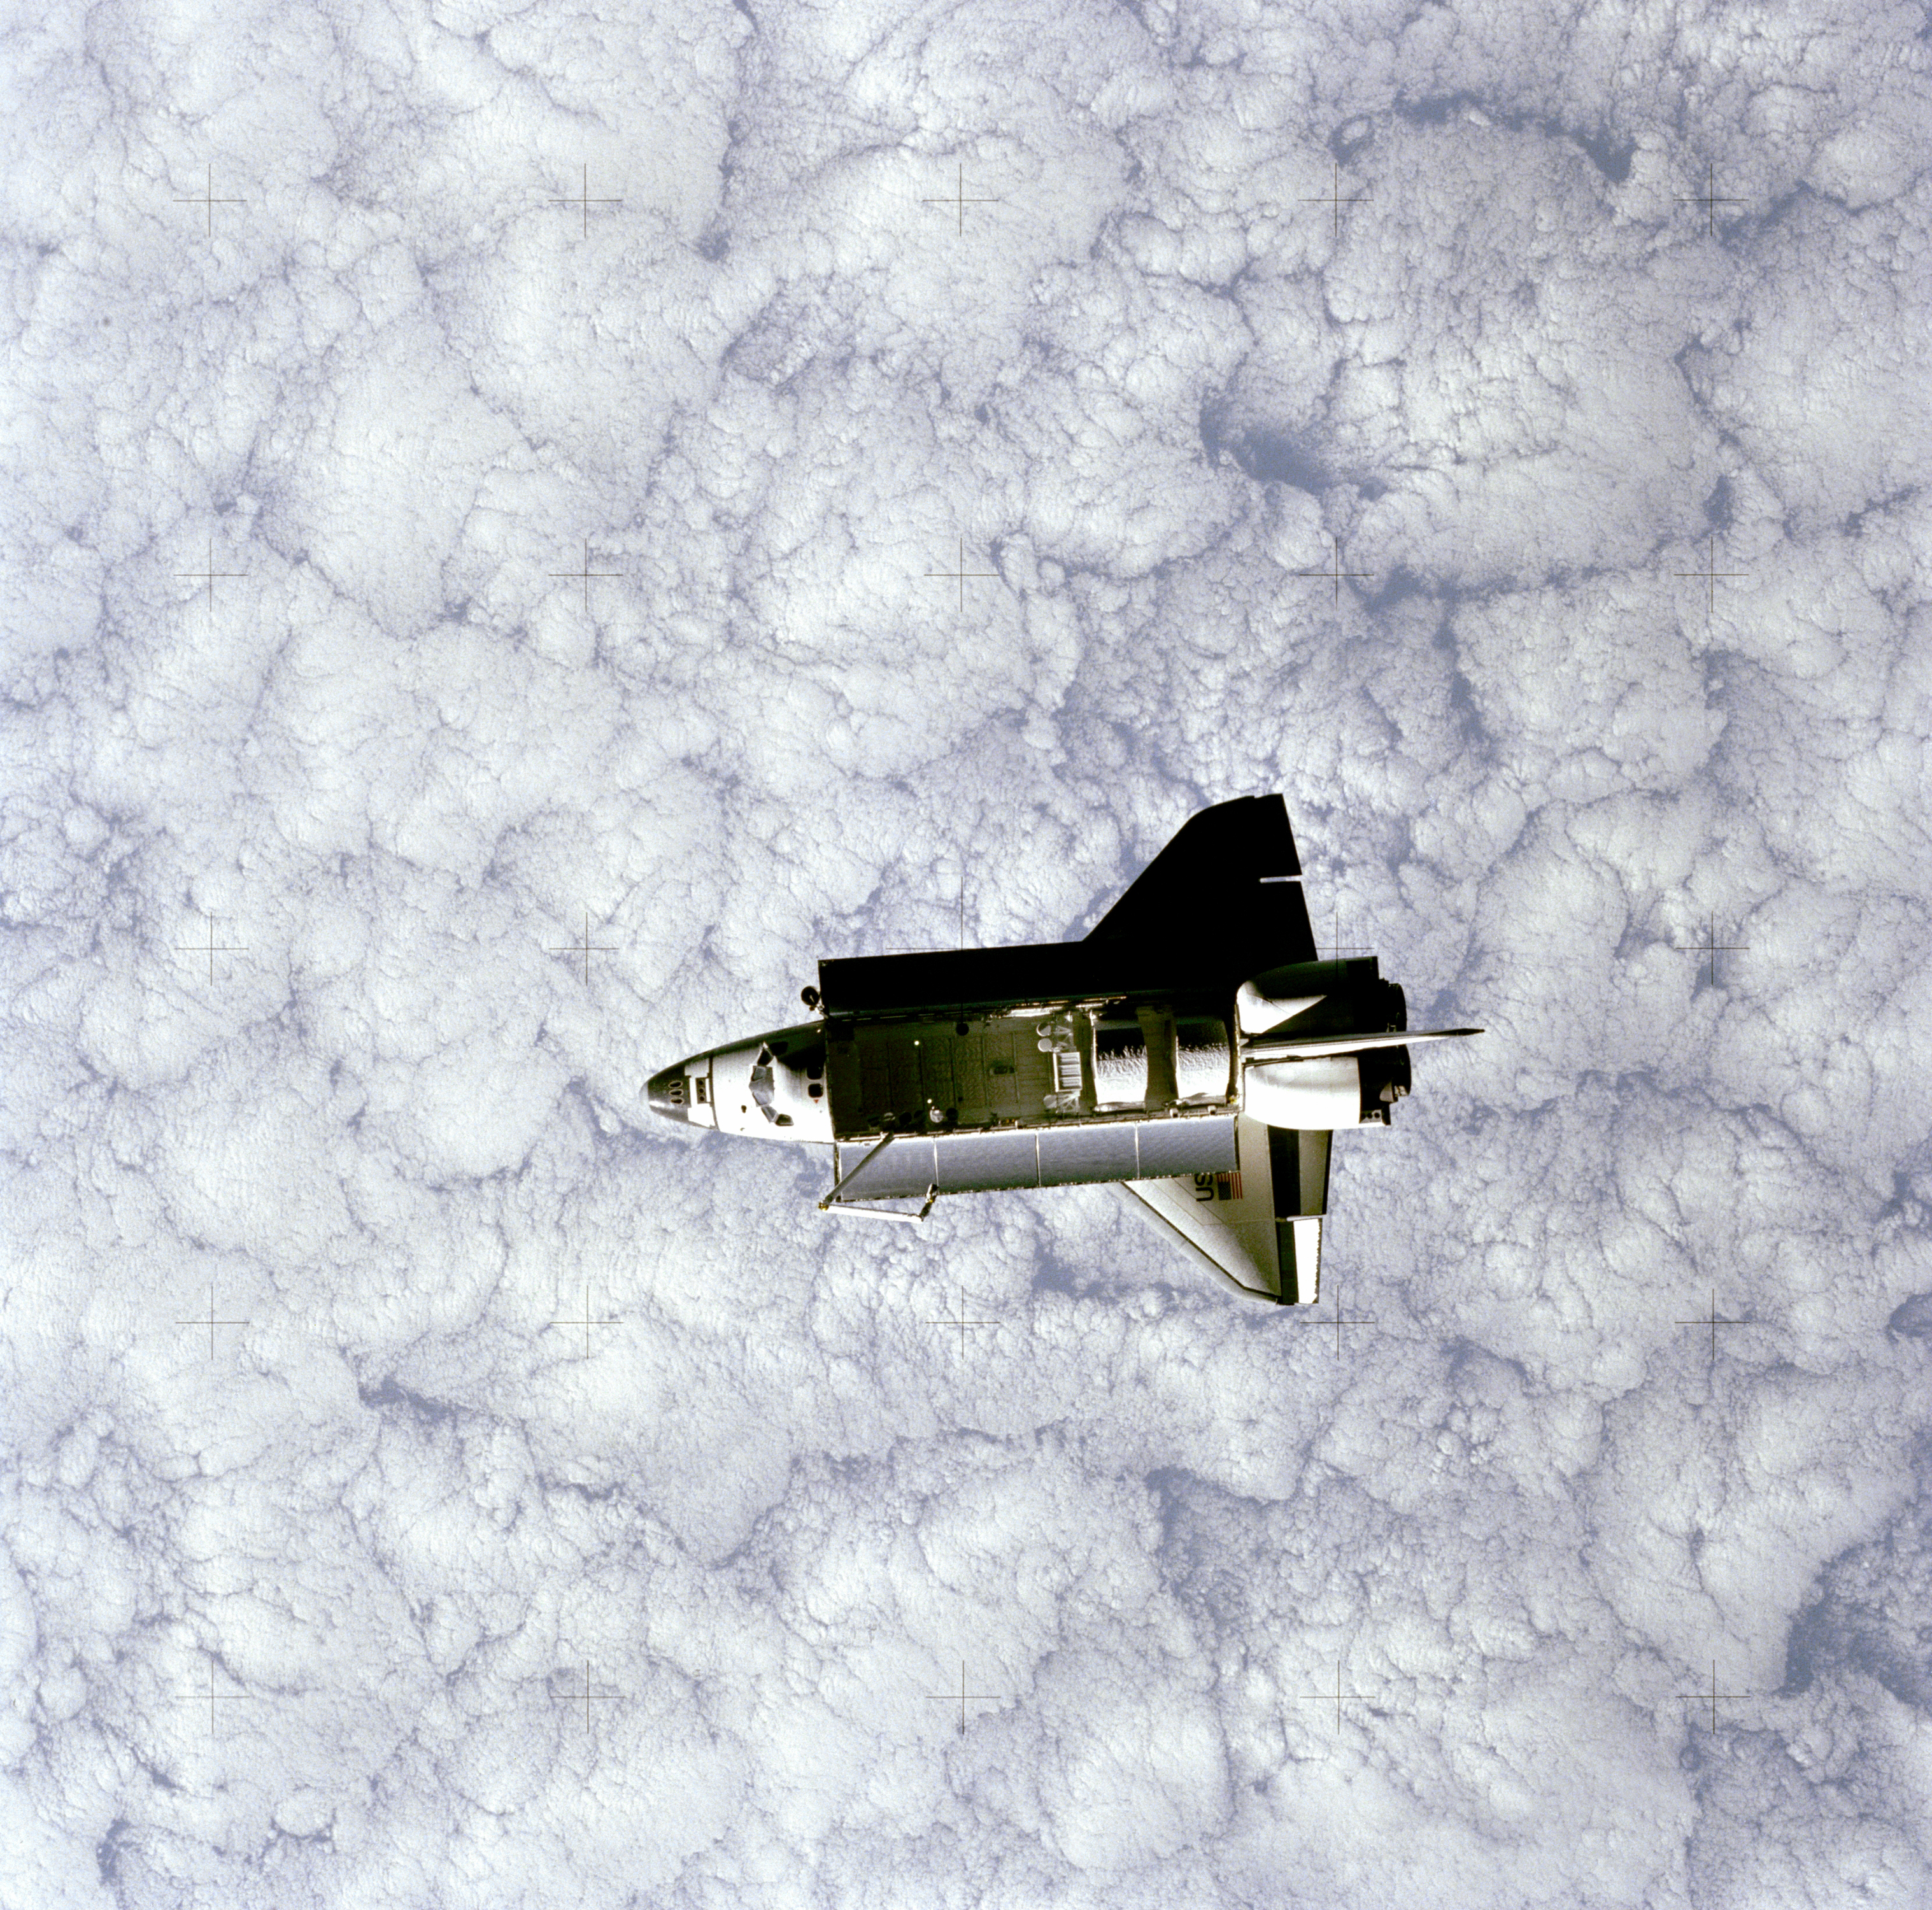 Challenger as seen from SPAS - GPN-2000-001031